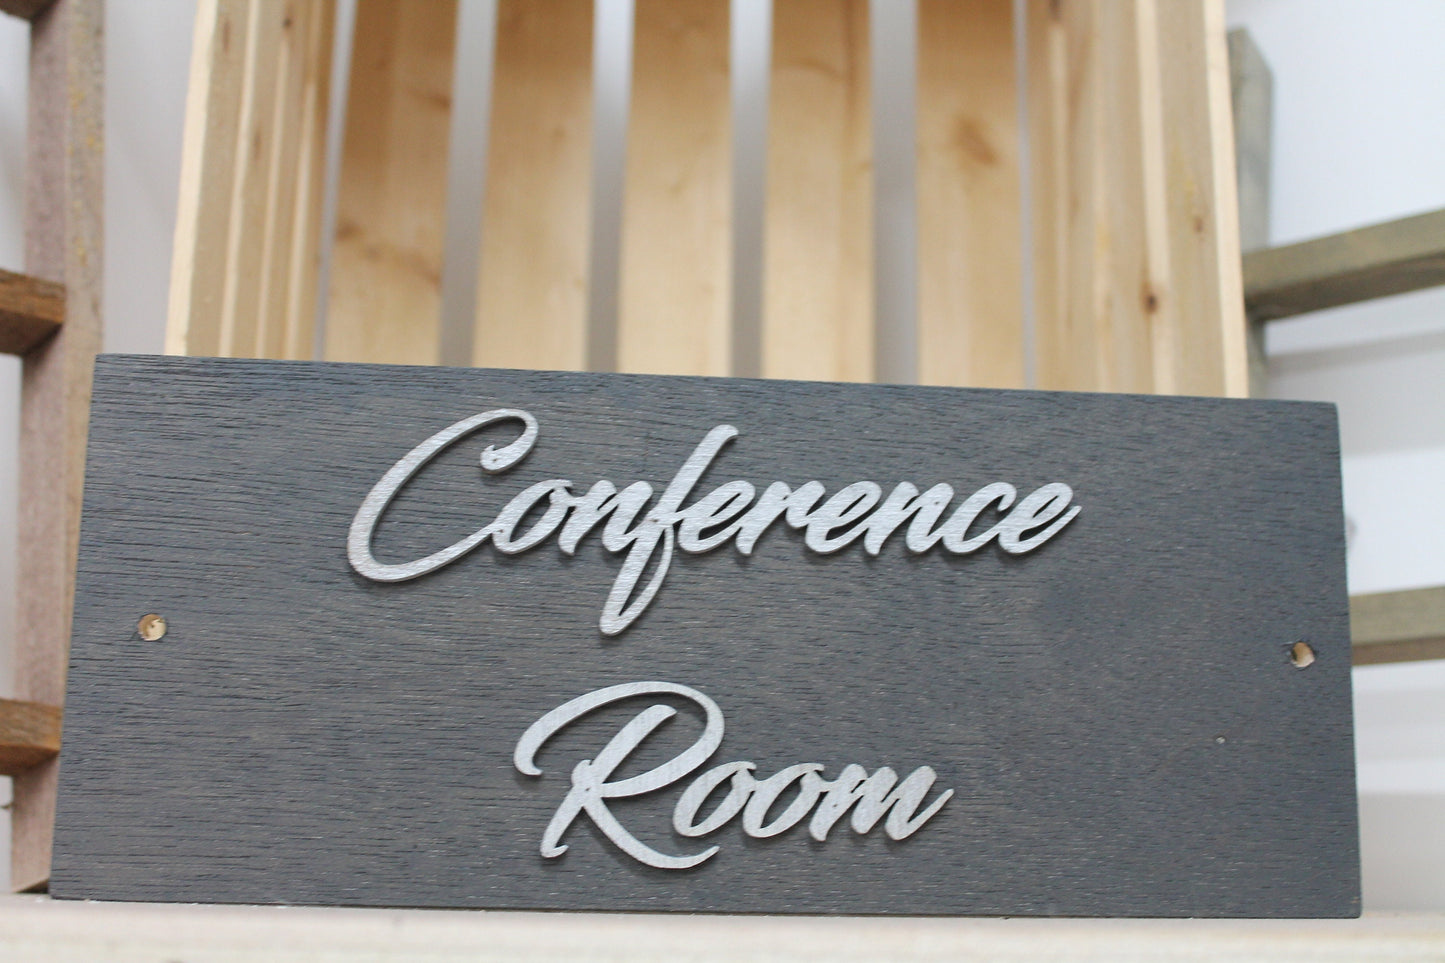 Conference Room Business Sign Unframed Commerical Signage 3D Raised Letters Company Personalized Wooden Sign Customizable Matching Direction